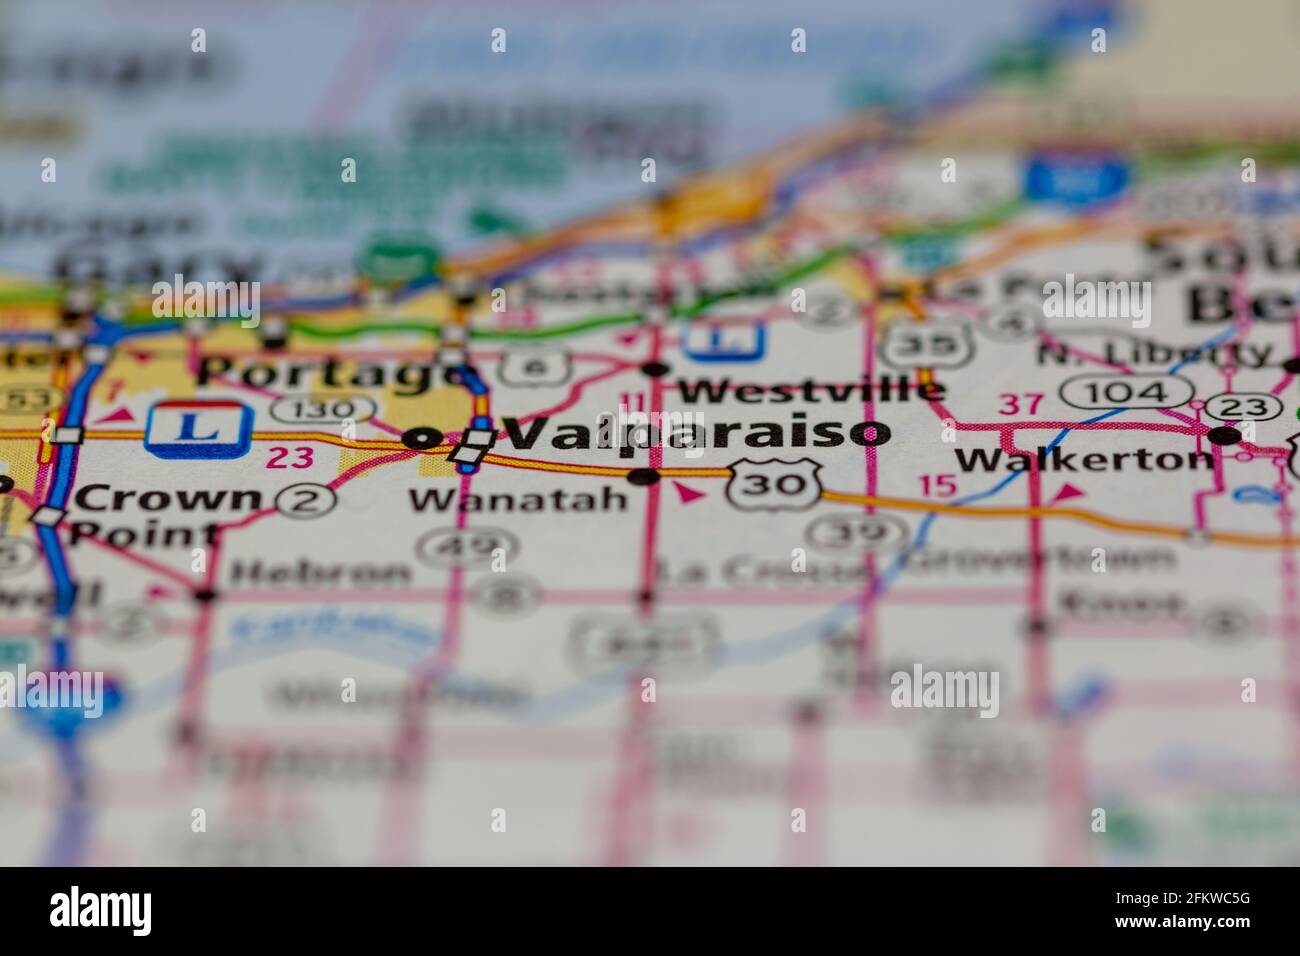 Valparaiso Indiana USA shown on a geography map or road map Stock Photo